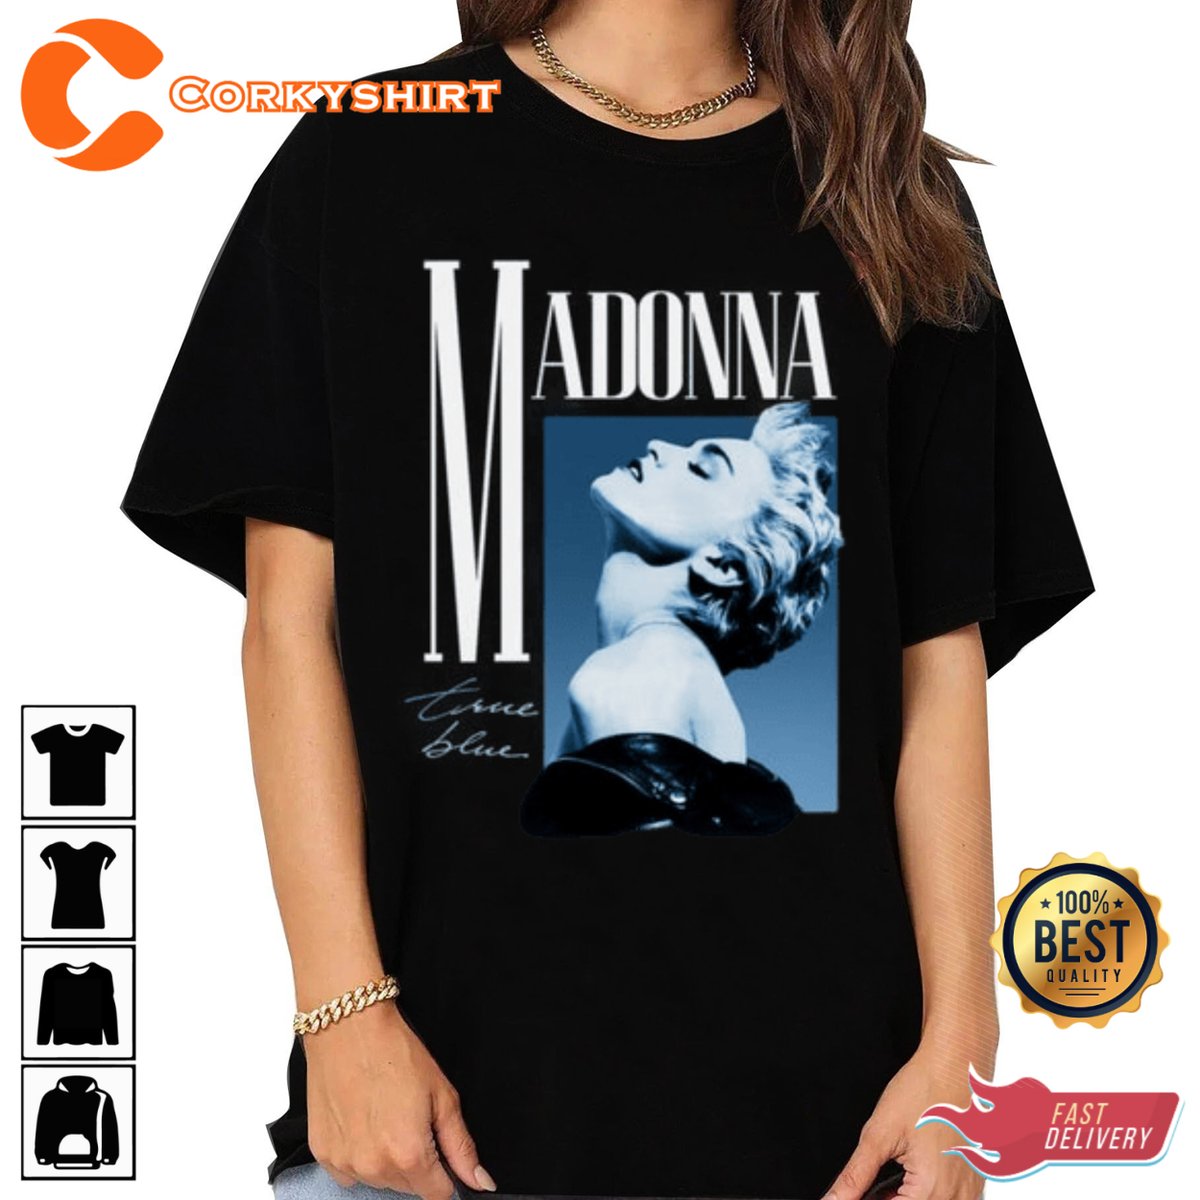 True Blue Lyrics giving us the feeling of being gently cared for through rhythm, let's learn more about True Blue Meaning through the product.
corkyshirt.com/madonna-true-b…
#music #trueblue #songwriter #actress #queenofpop #seizeshirt